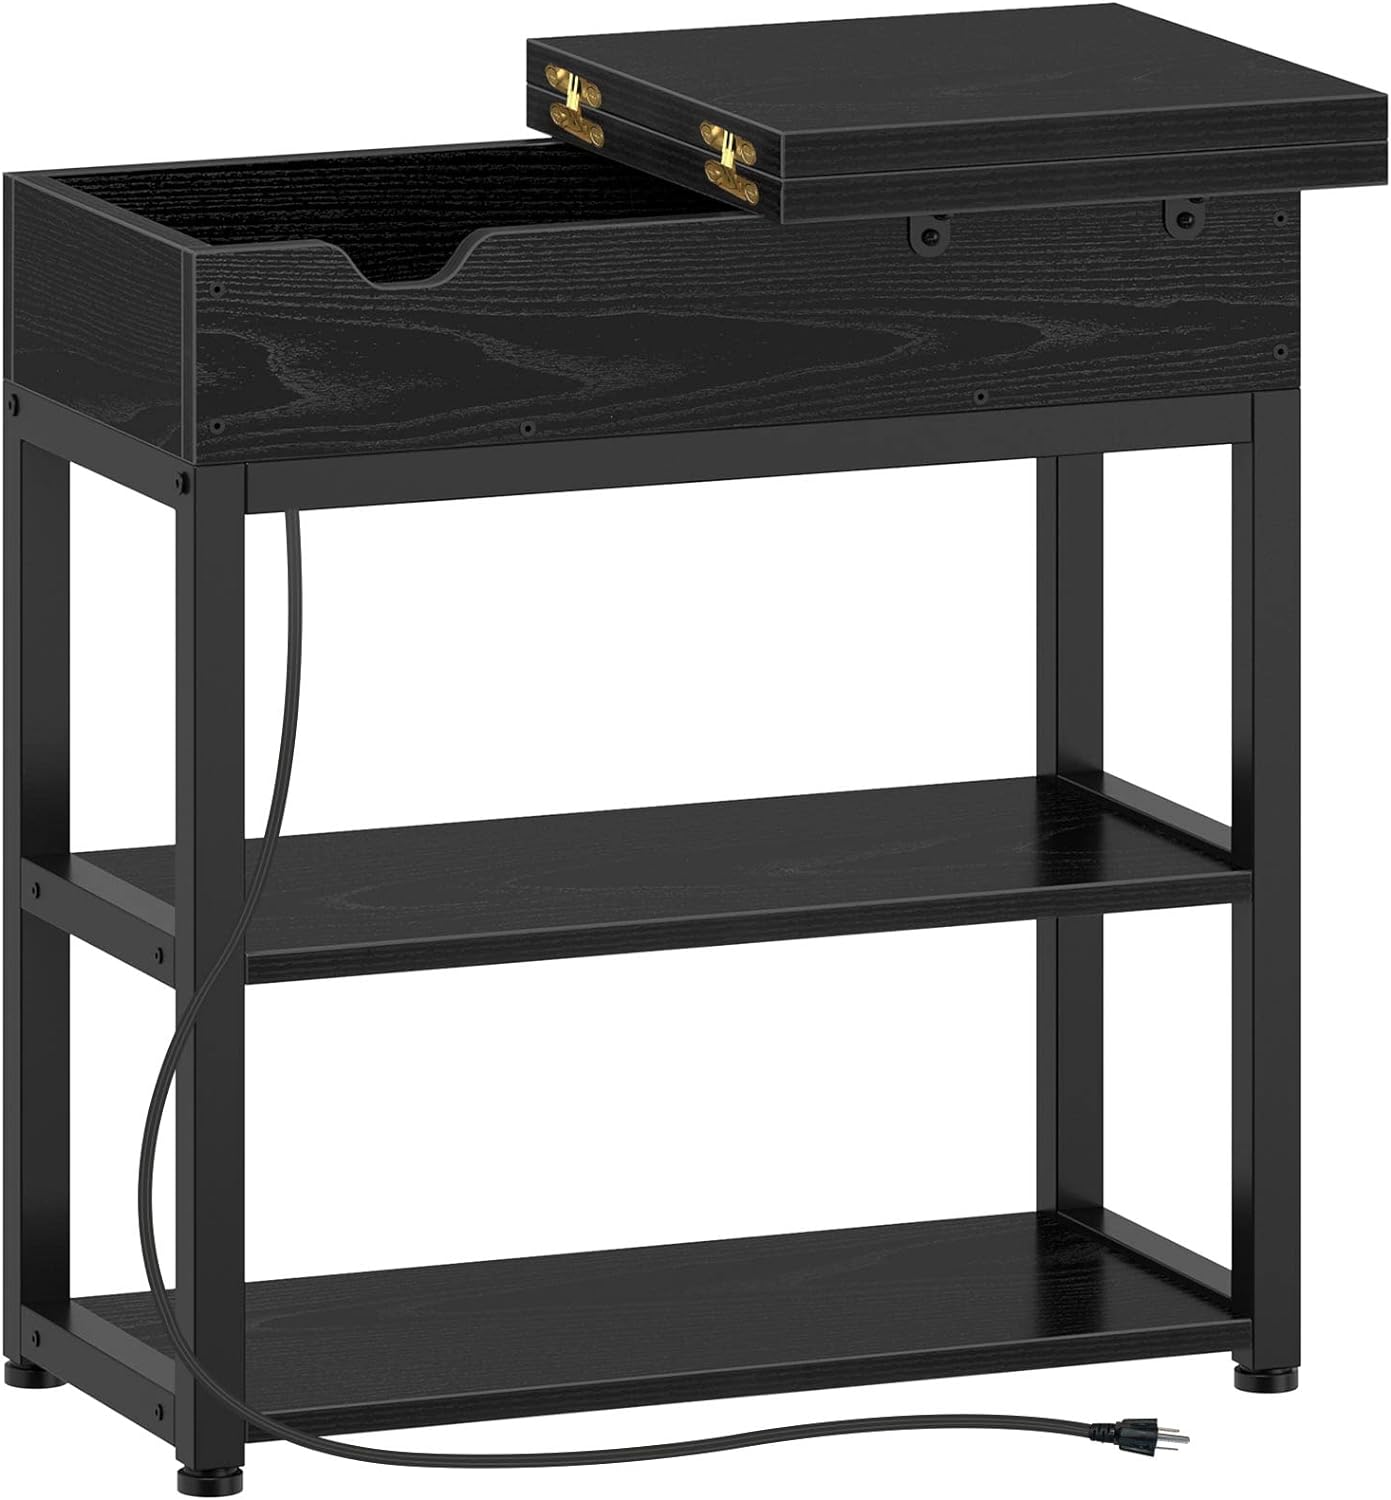 Rolanstar End Table with Charging Station, Narrow Nightstand, Flip Top Side Table with USB Ports and Storage Shelves for Small Spaces, Living Room, Bedroom, Black